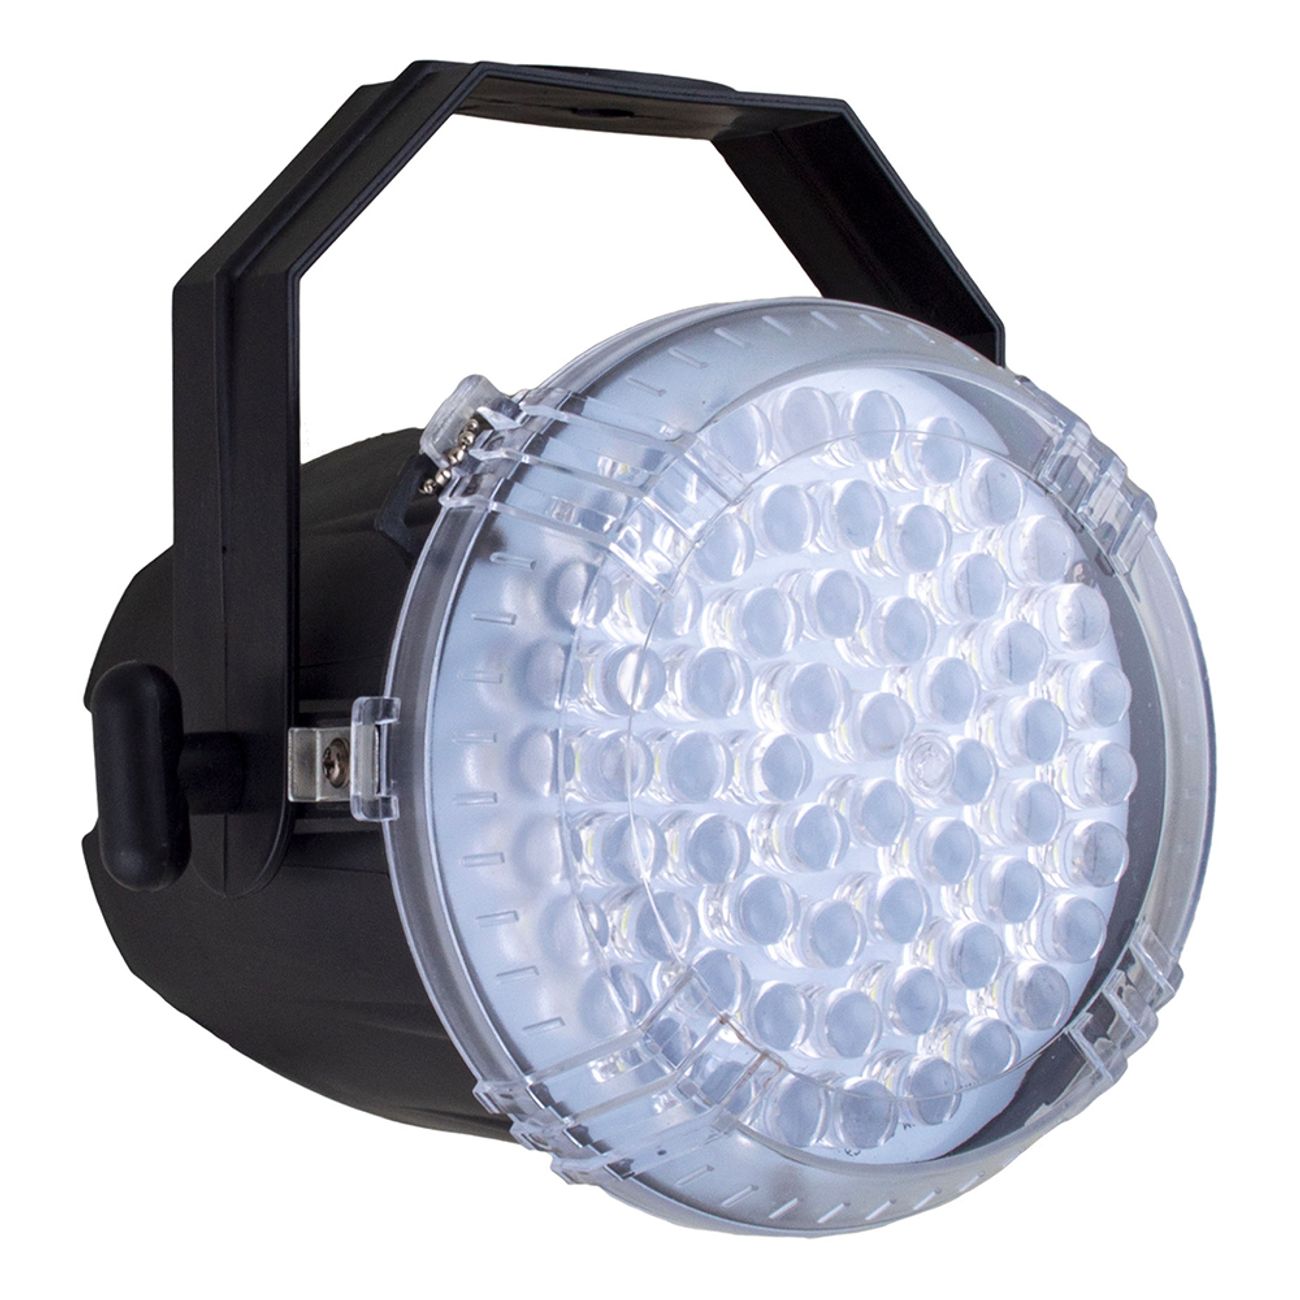 https://static.partyking.org/fit-in/1300x0/products/original/led-strobe-light-rund-89581-1.jpg